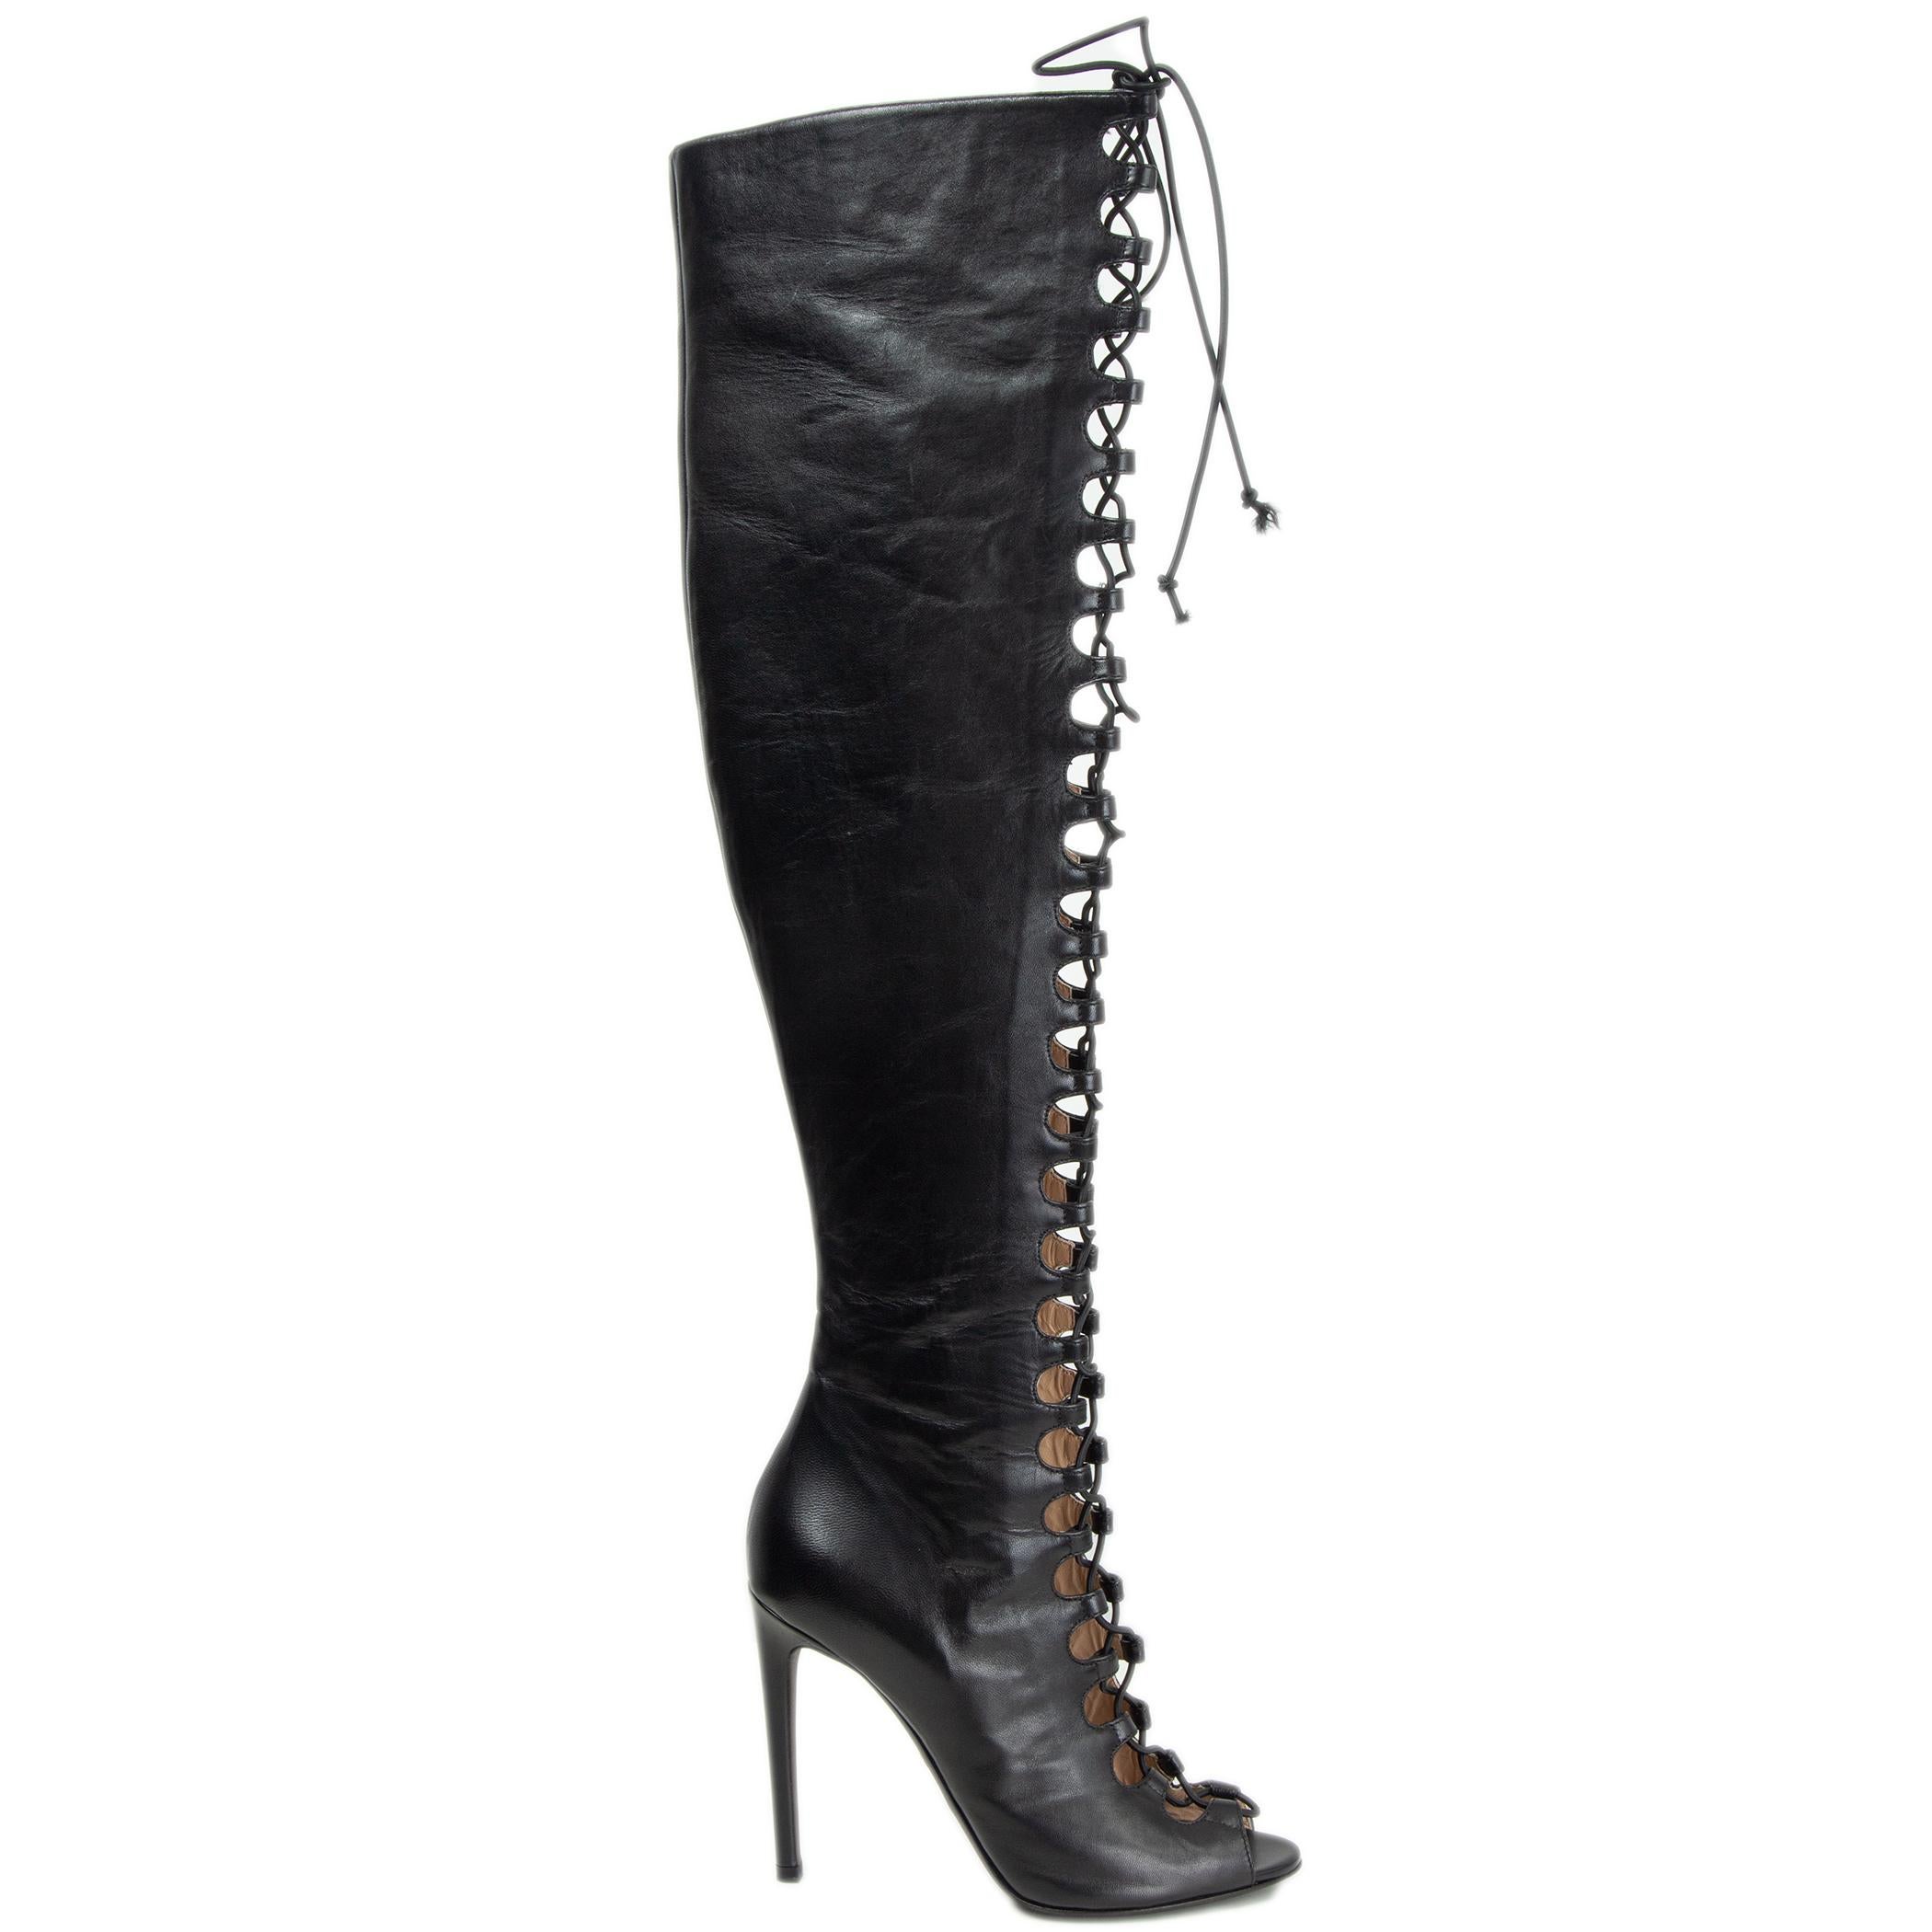 GIAMBATTISTA VALLI black leather VALLI LACE UP OVER KNEE Boots Shoes 37.5